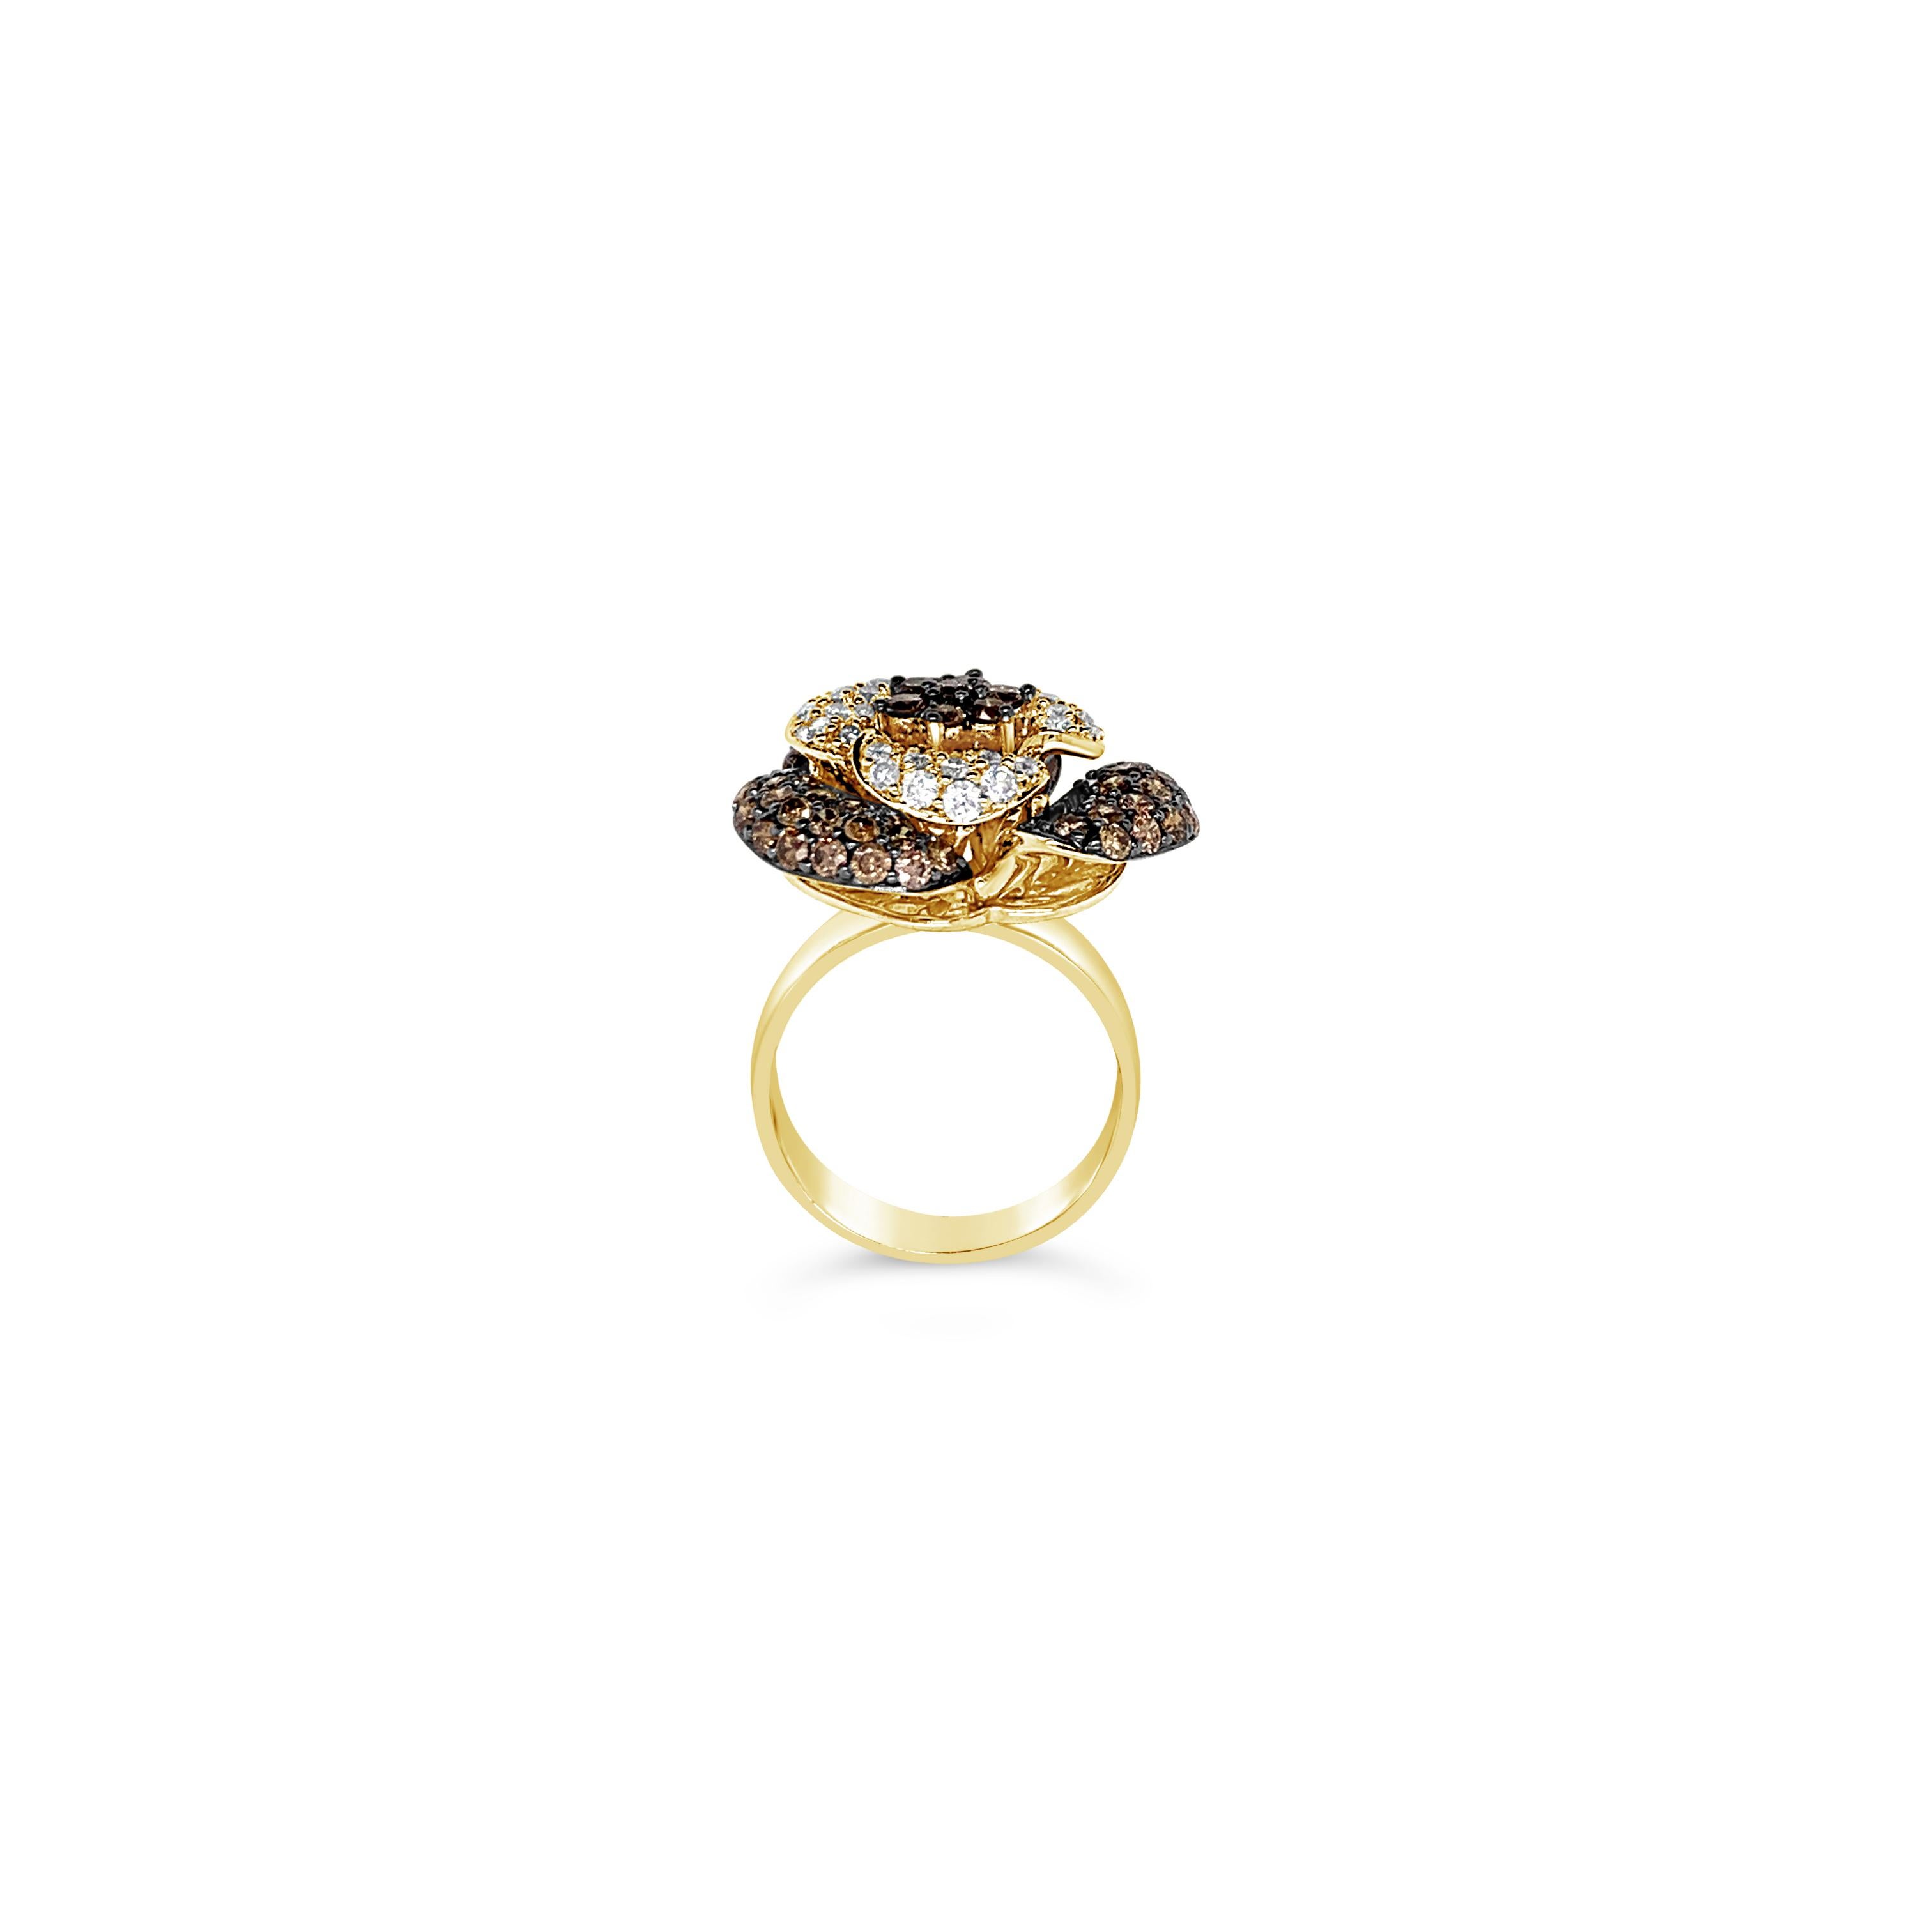 Le Vian® Ring featuring .56 cts. Vanilla Diamonds®, 1.76 cts. Chocolate Diamonds® set in 14K Honey Gold™

Diamonds Breakdown:
1.76 cts Brown Diamonds
.56 cts White Diamonds

Gems Breakdown:
None

Ring may or may not be sizable, please feel free to